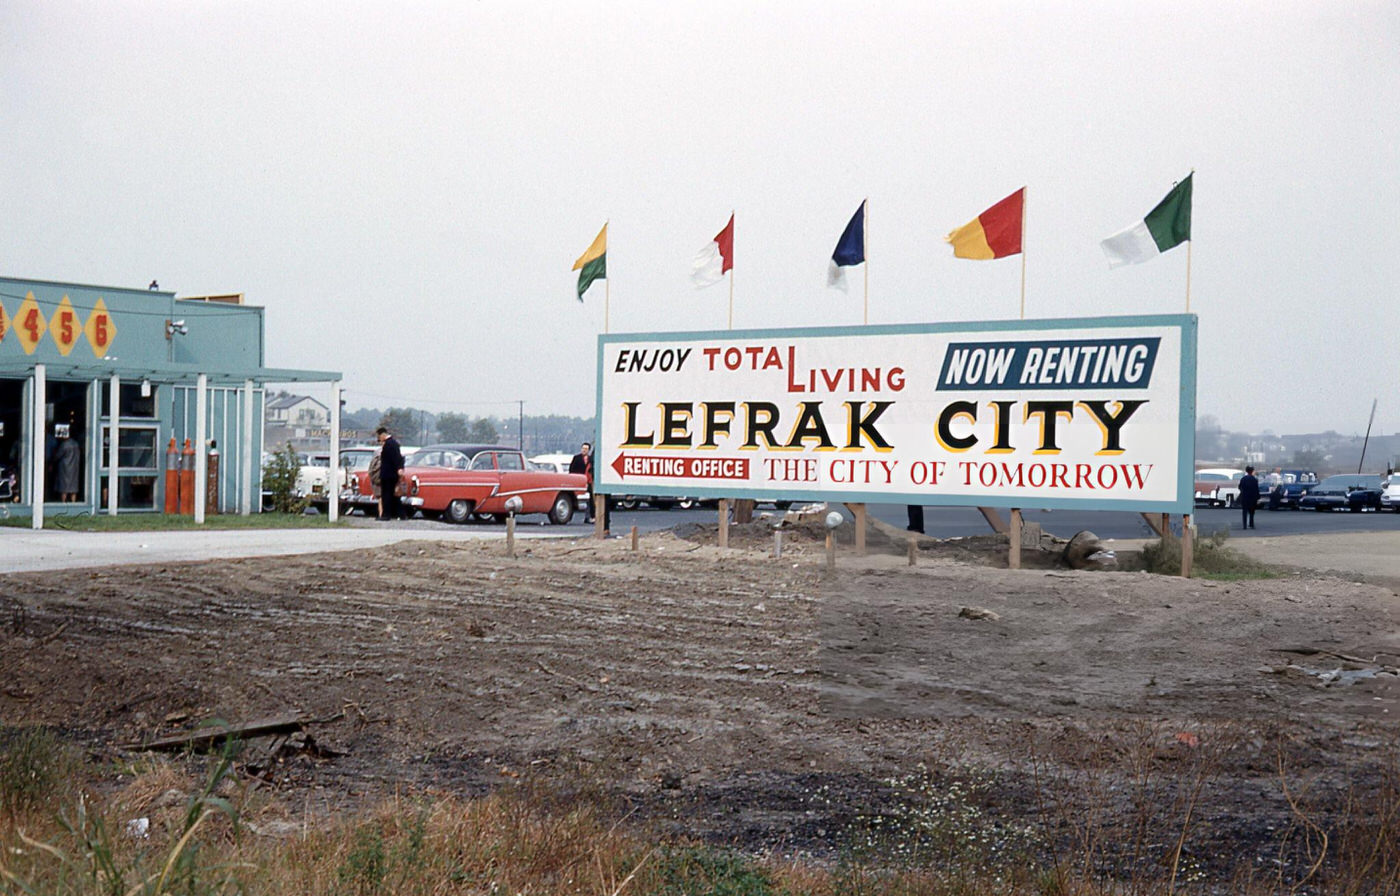 Sign For The Rental Office For Lefrak City Under Construction In Corona, 1960S.